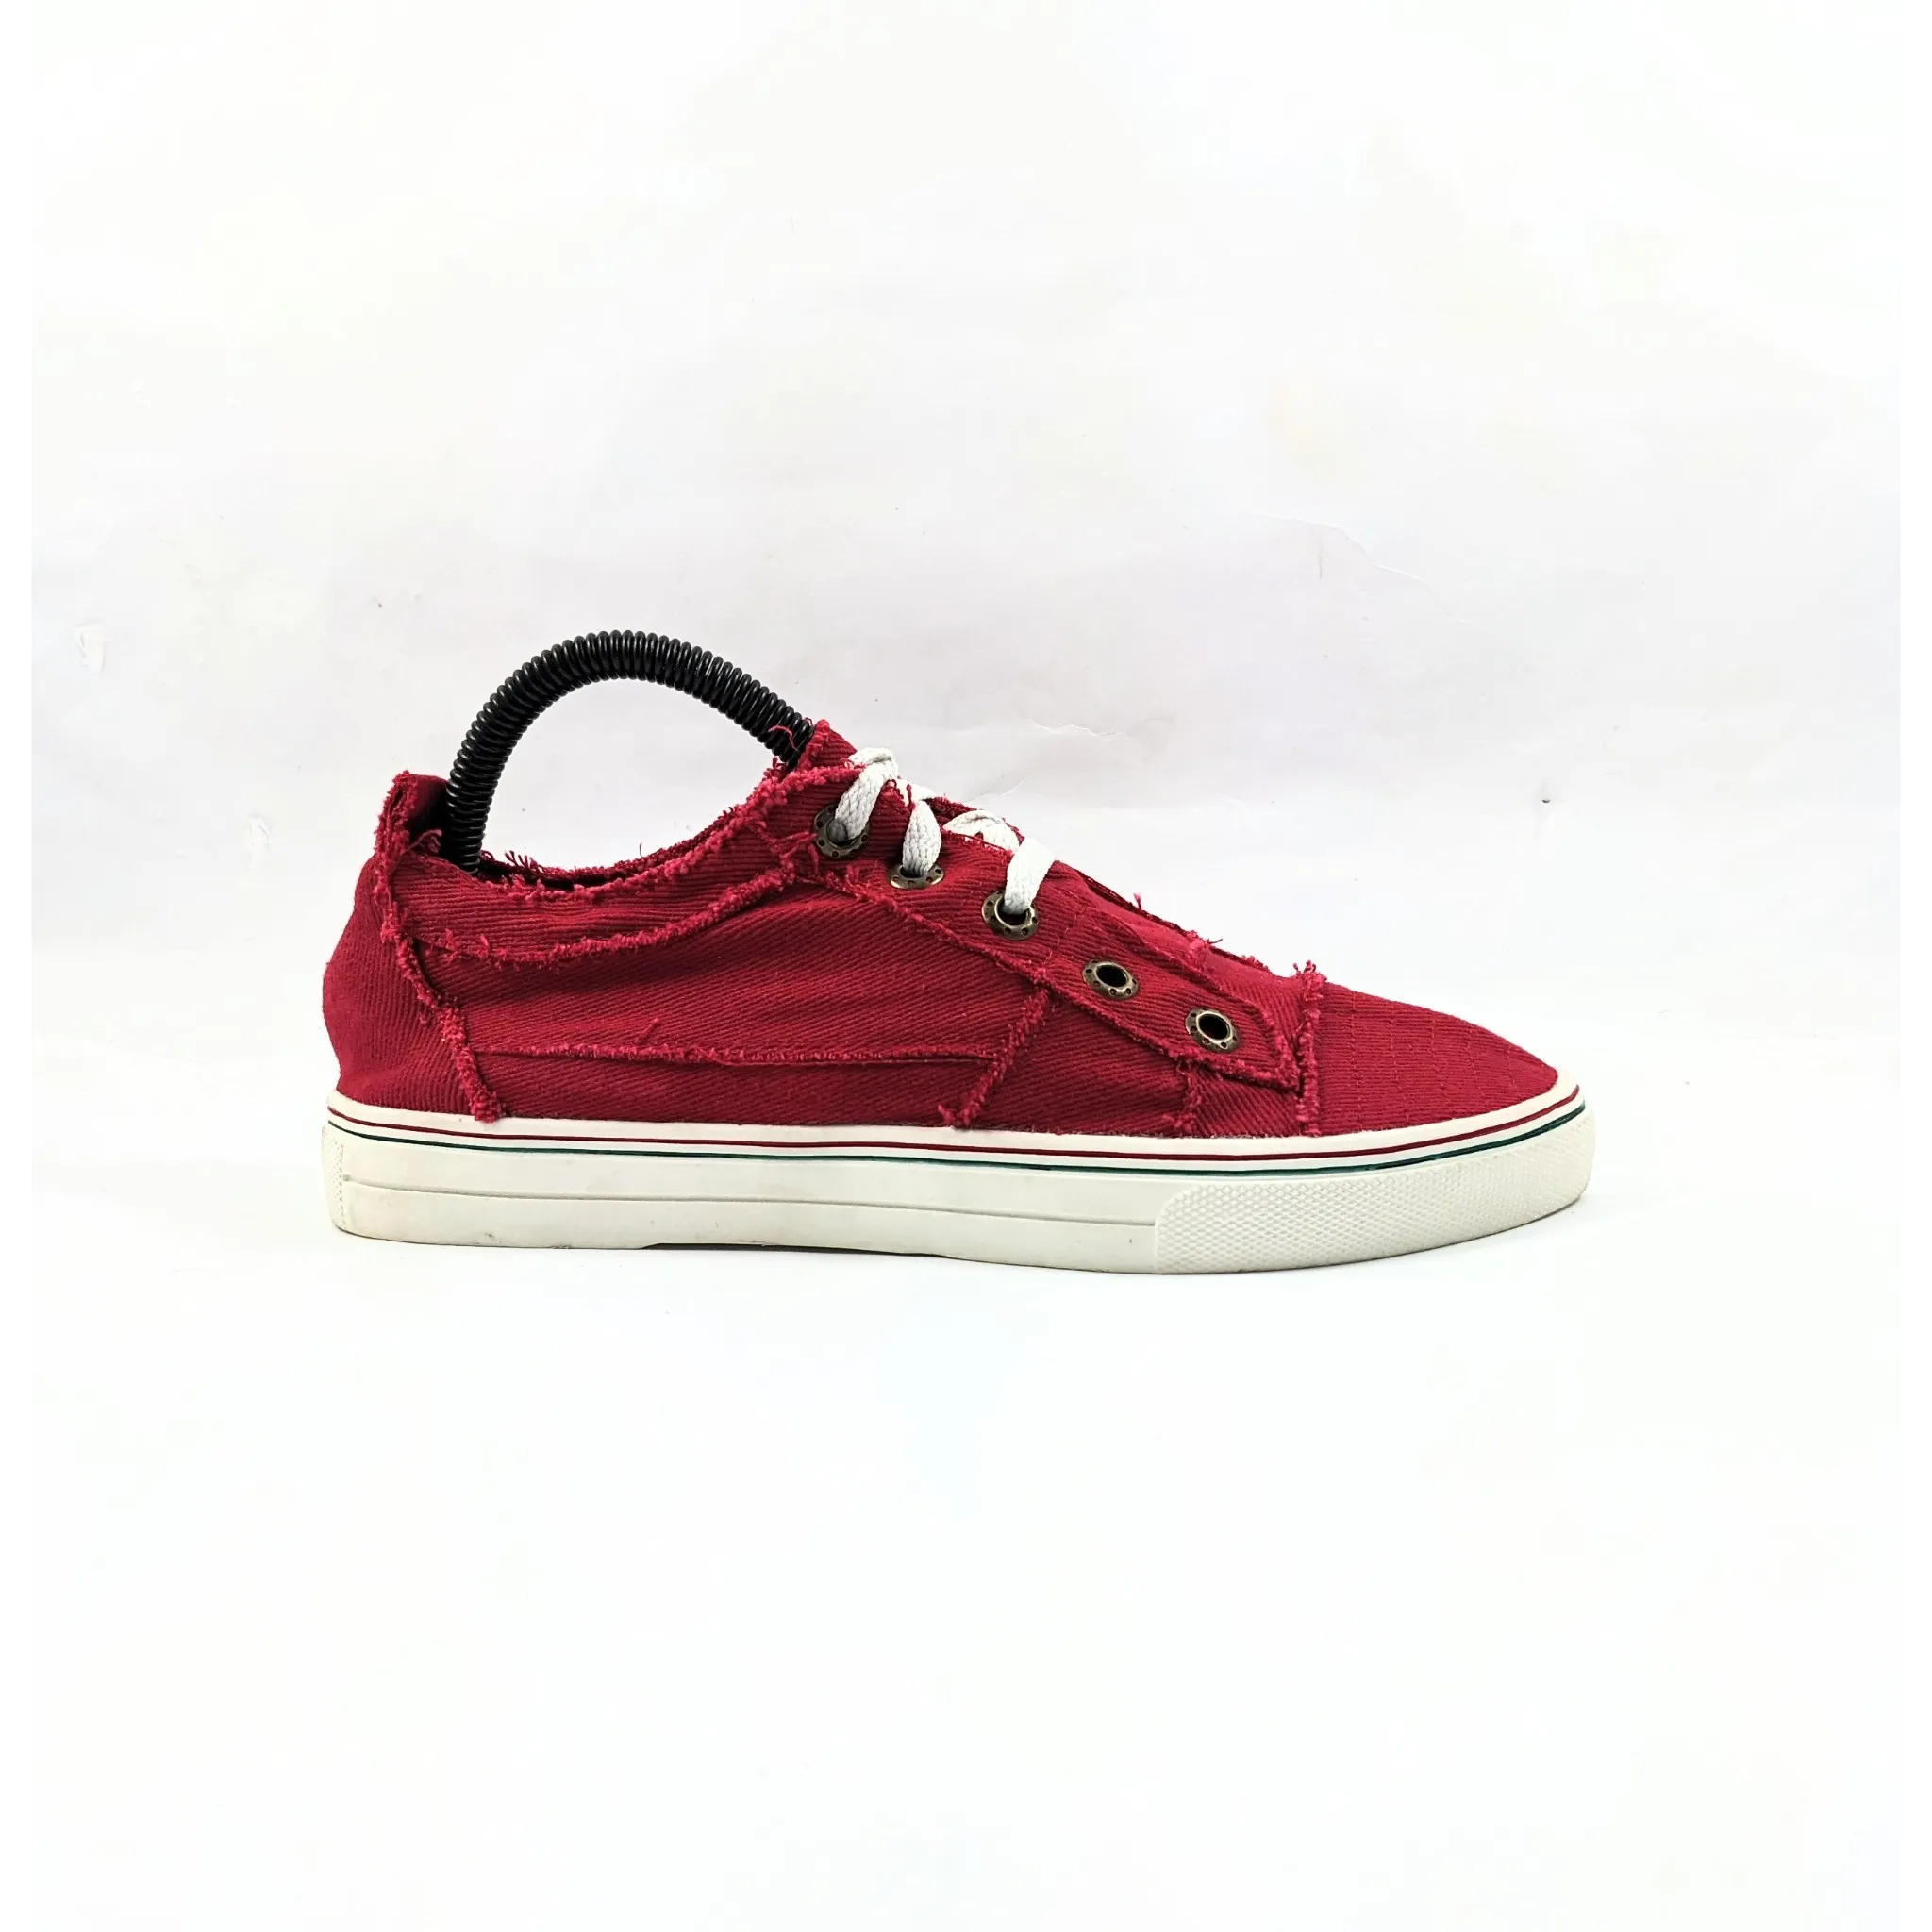 Jollimall Red Sneakers